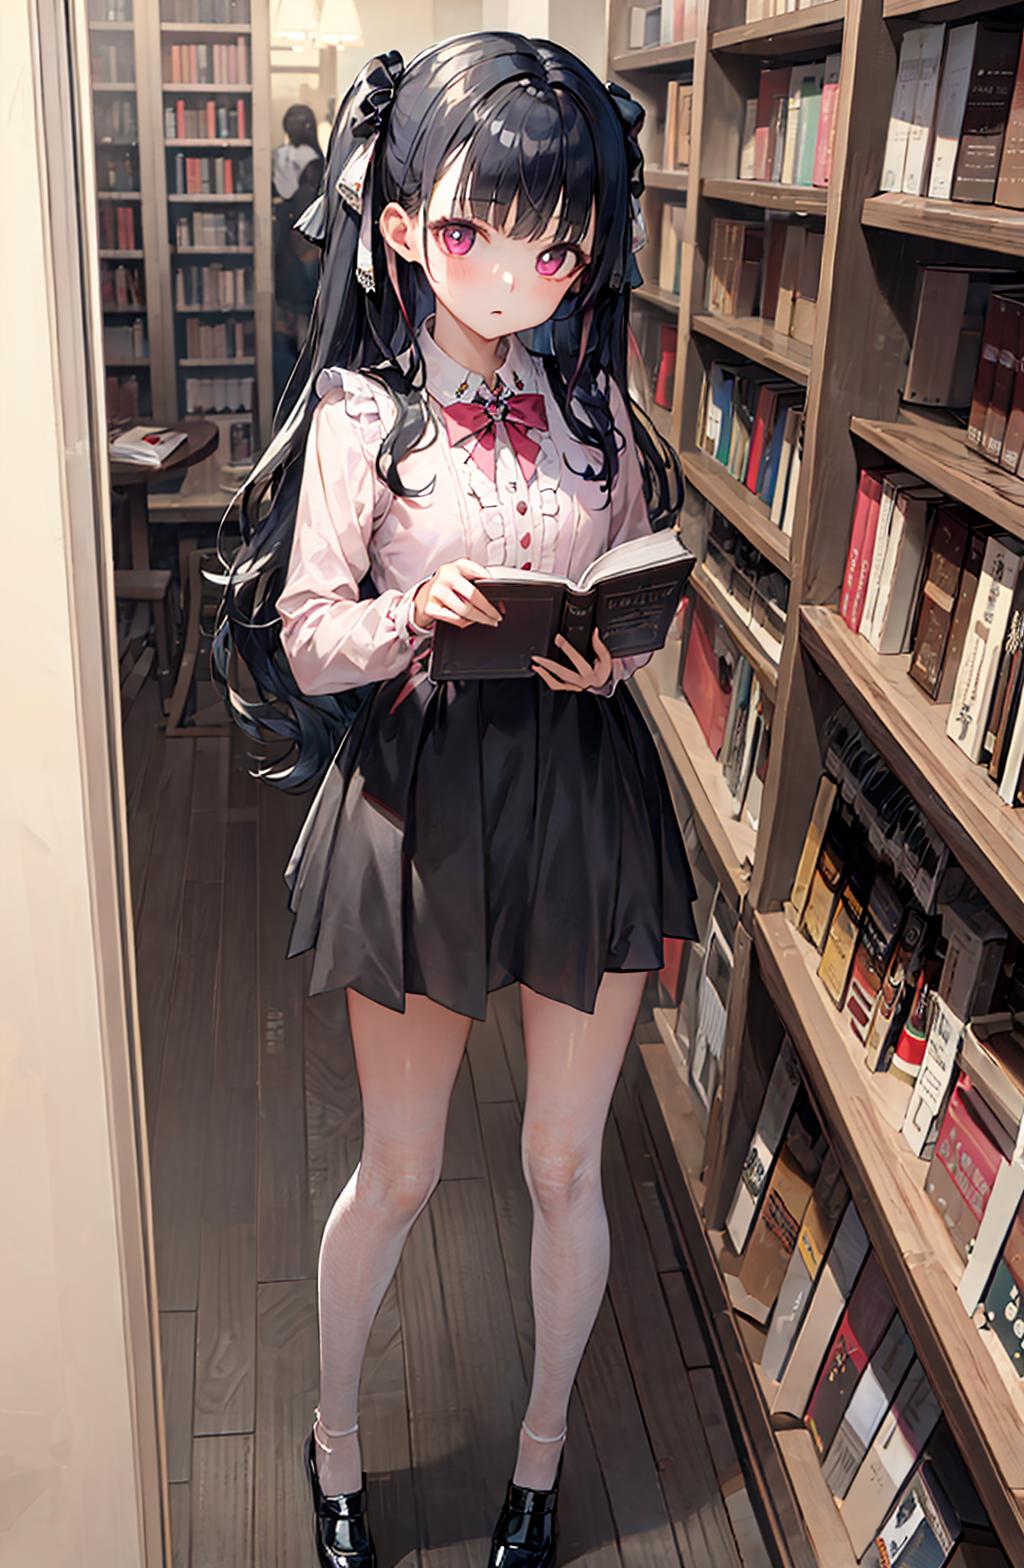 A woman in a pink shirt holding a book in a library.